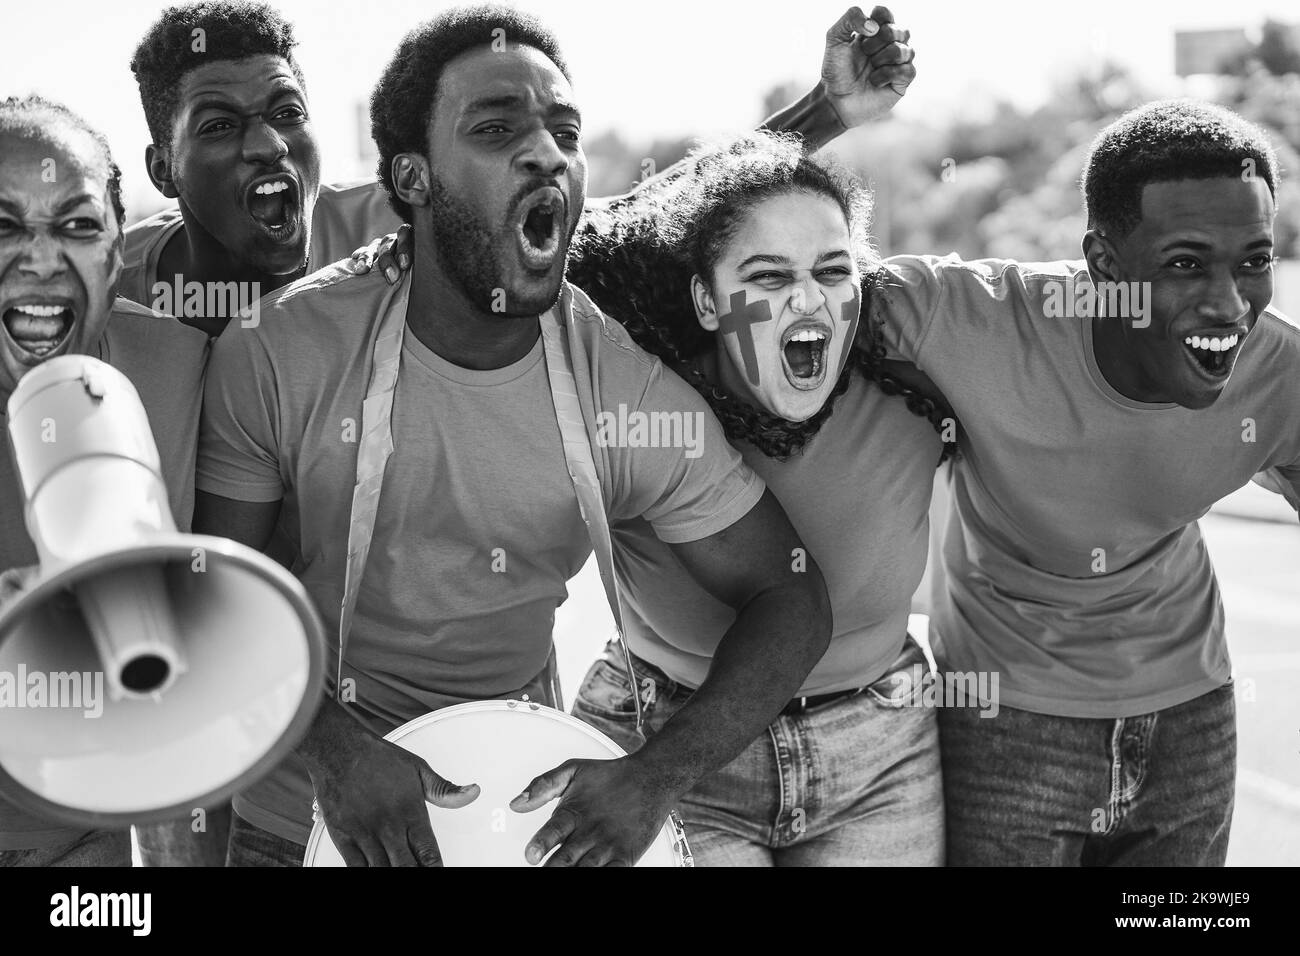 African sport fans screaming while supporting their team - Football supporters having fun at competition event - Black and white editing Stock Photo